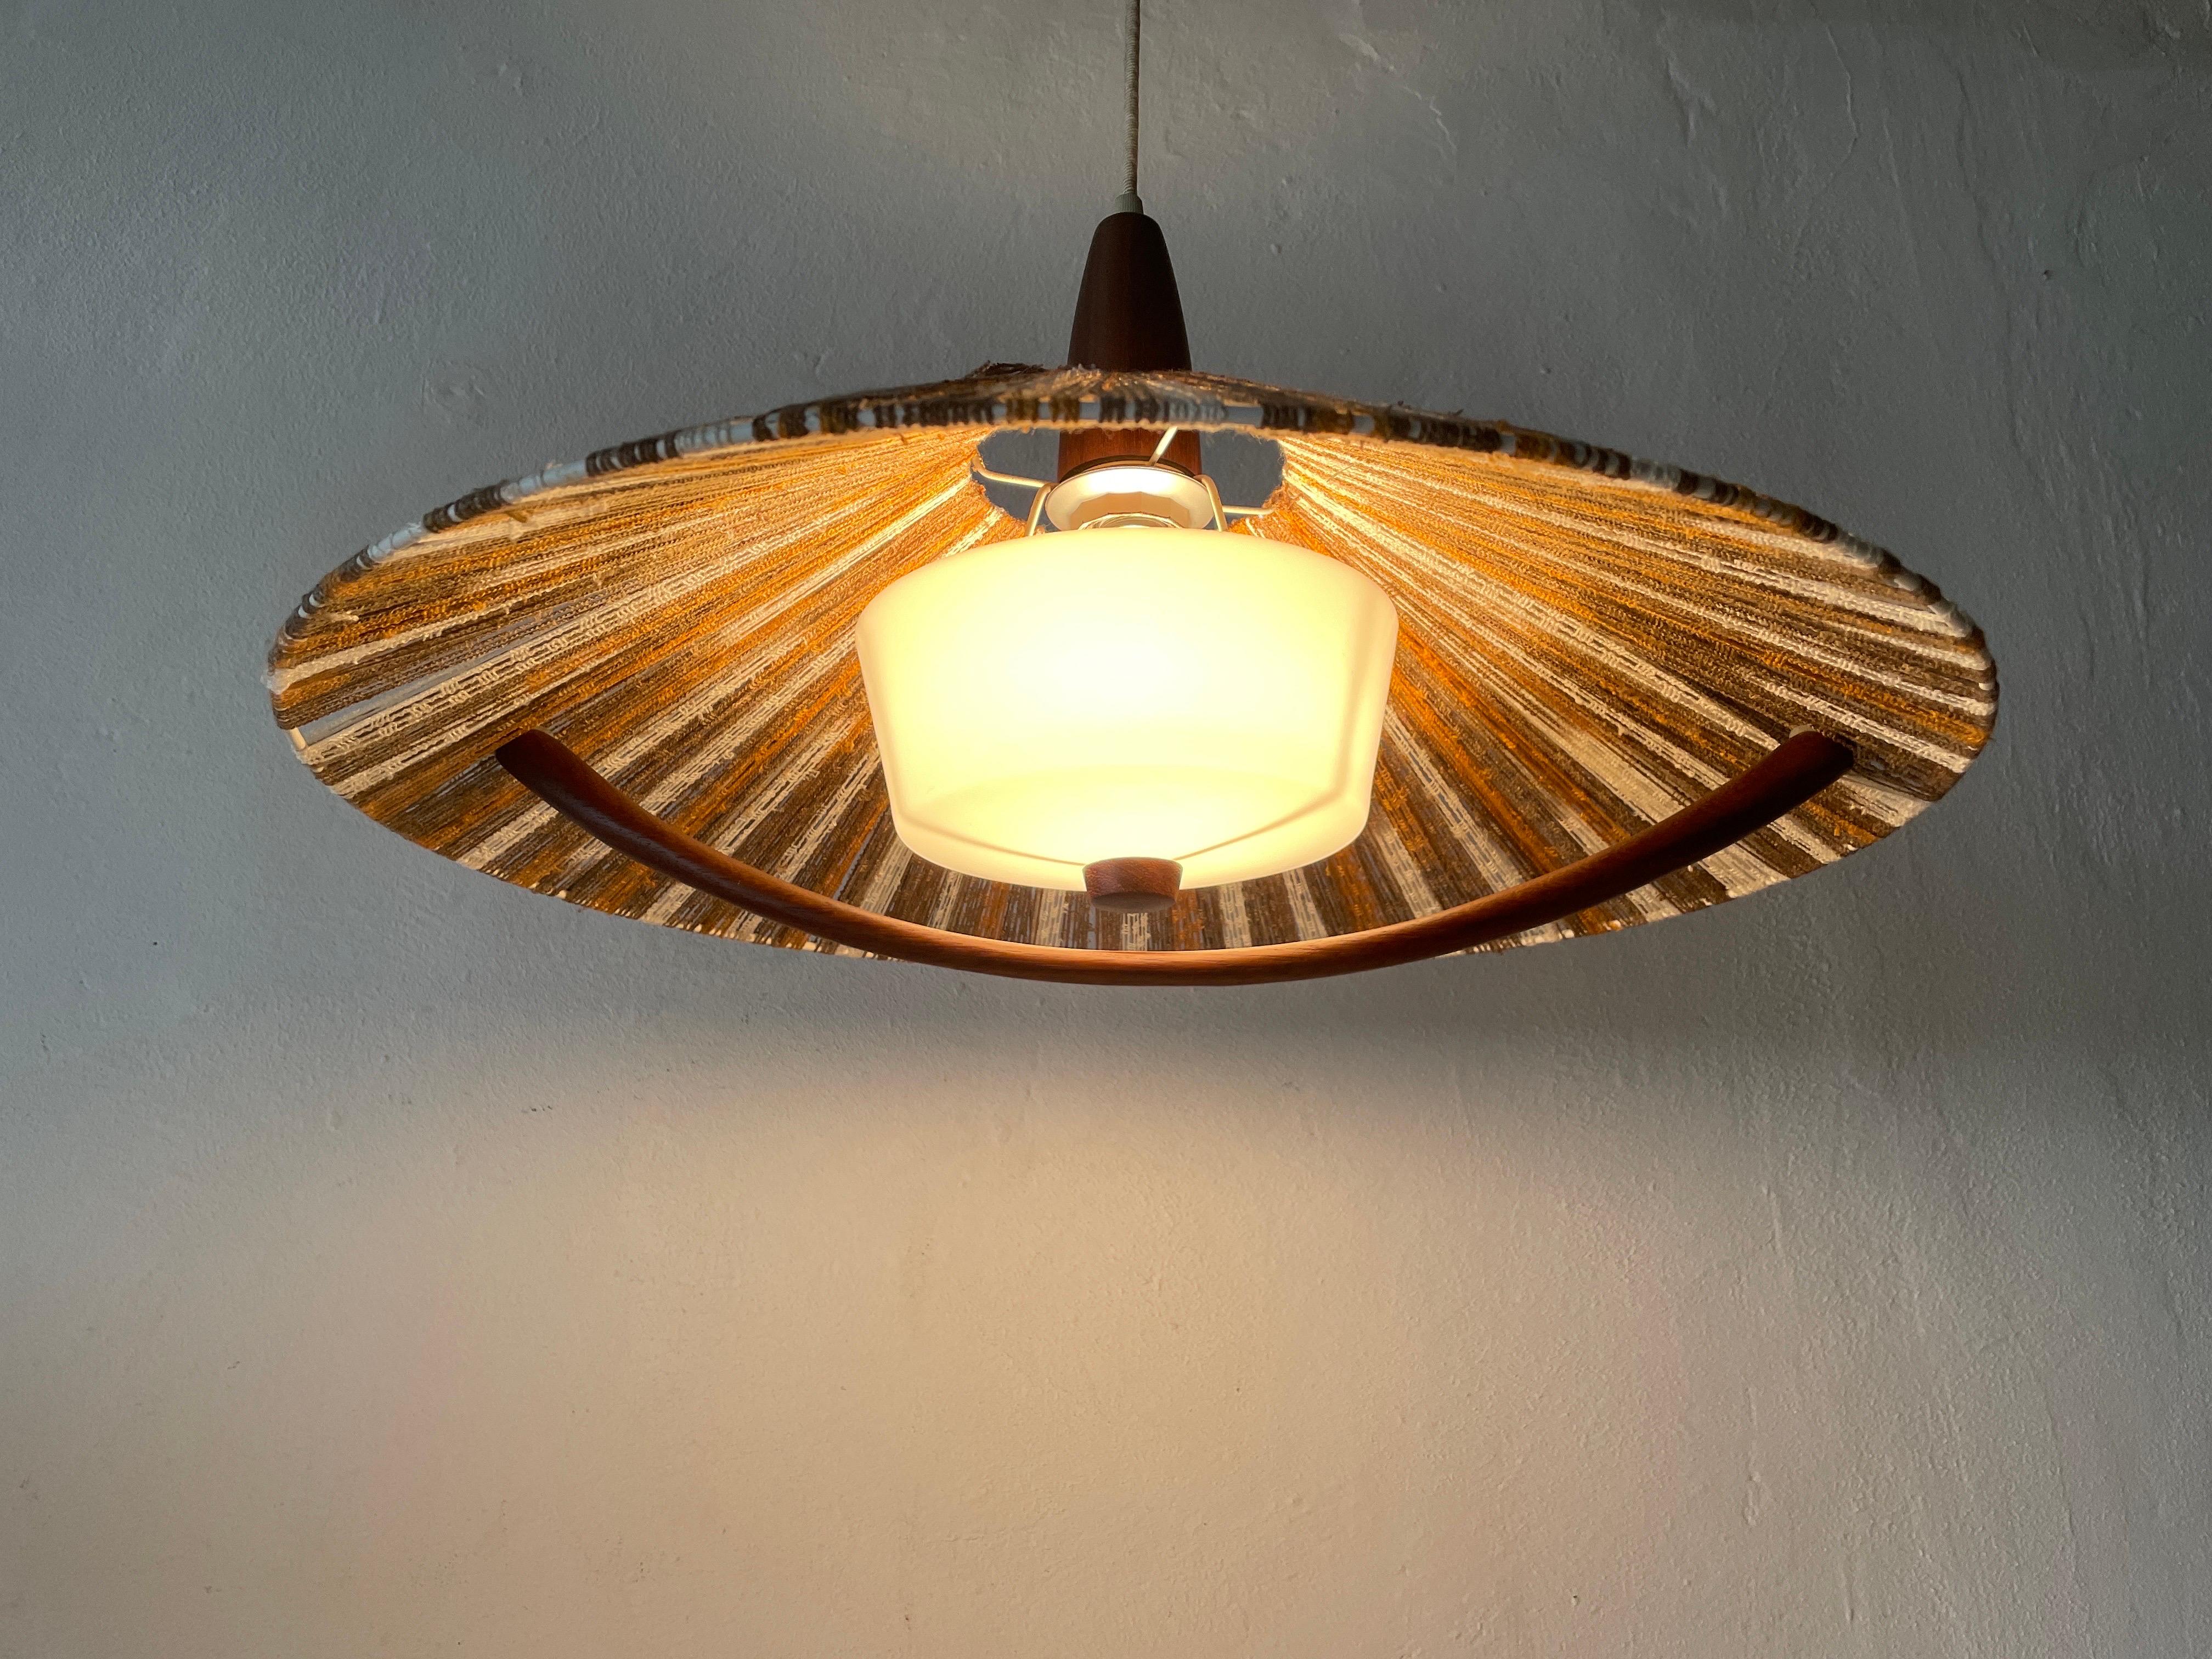 Colorful Raffia Bast and Teak Pendant Lamp by Temde, 1960s, Germany For Sale 9